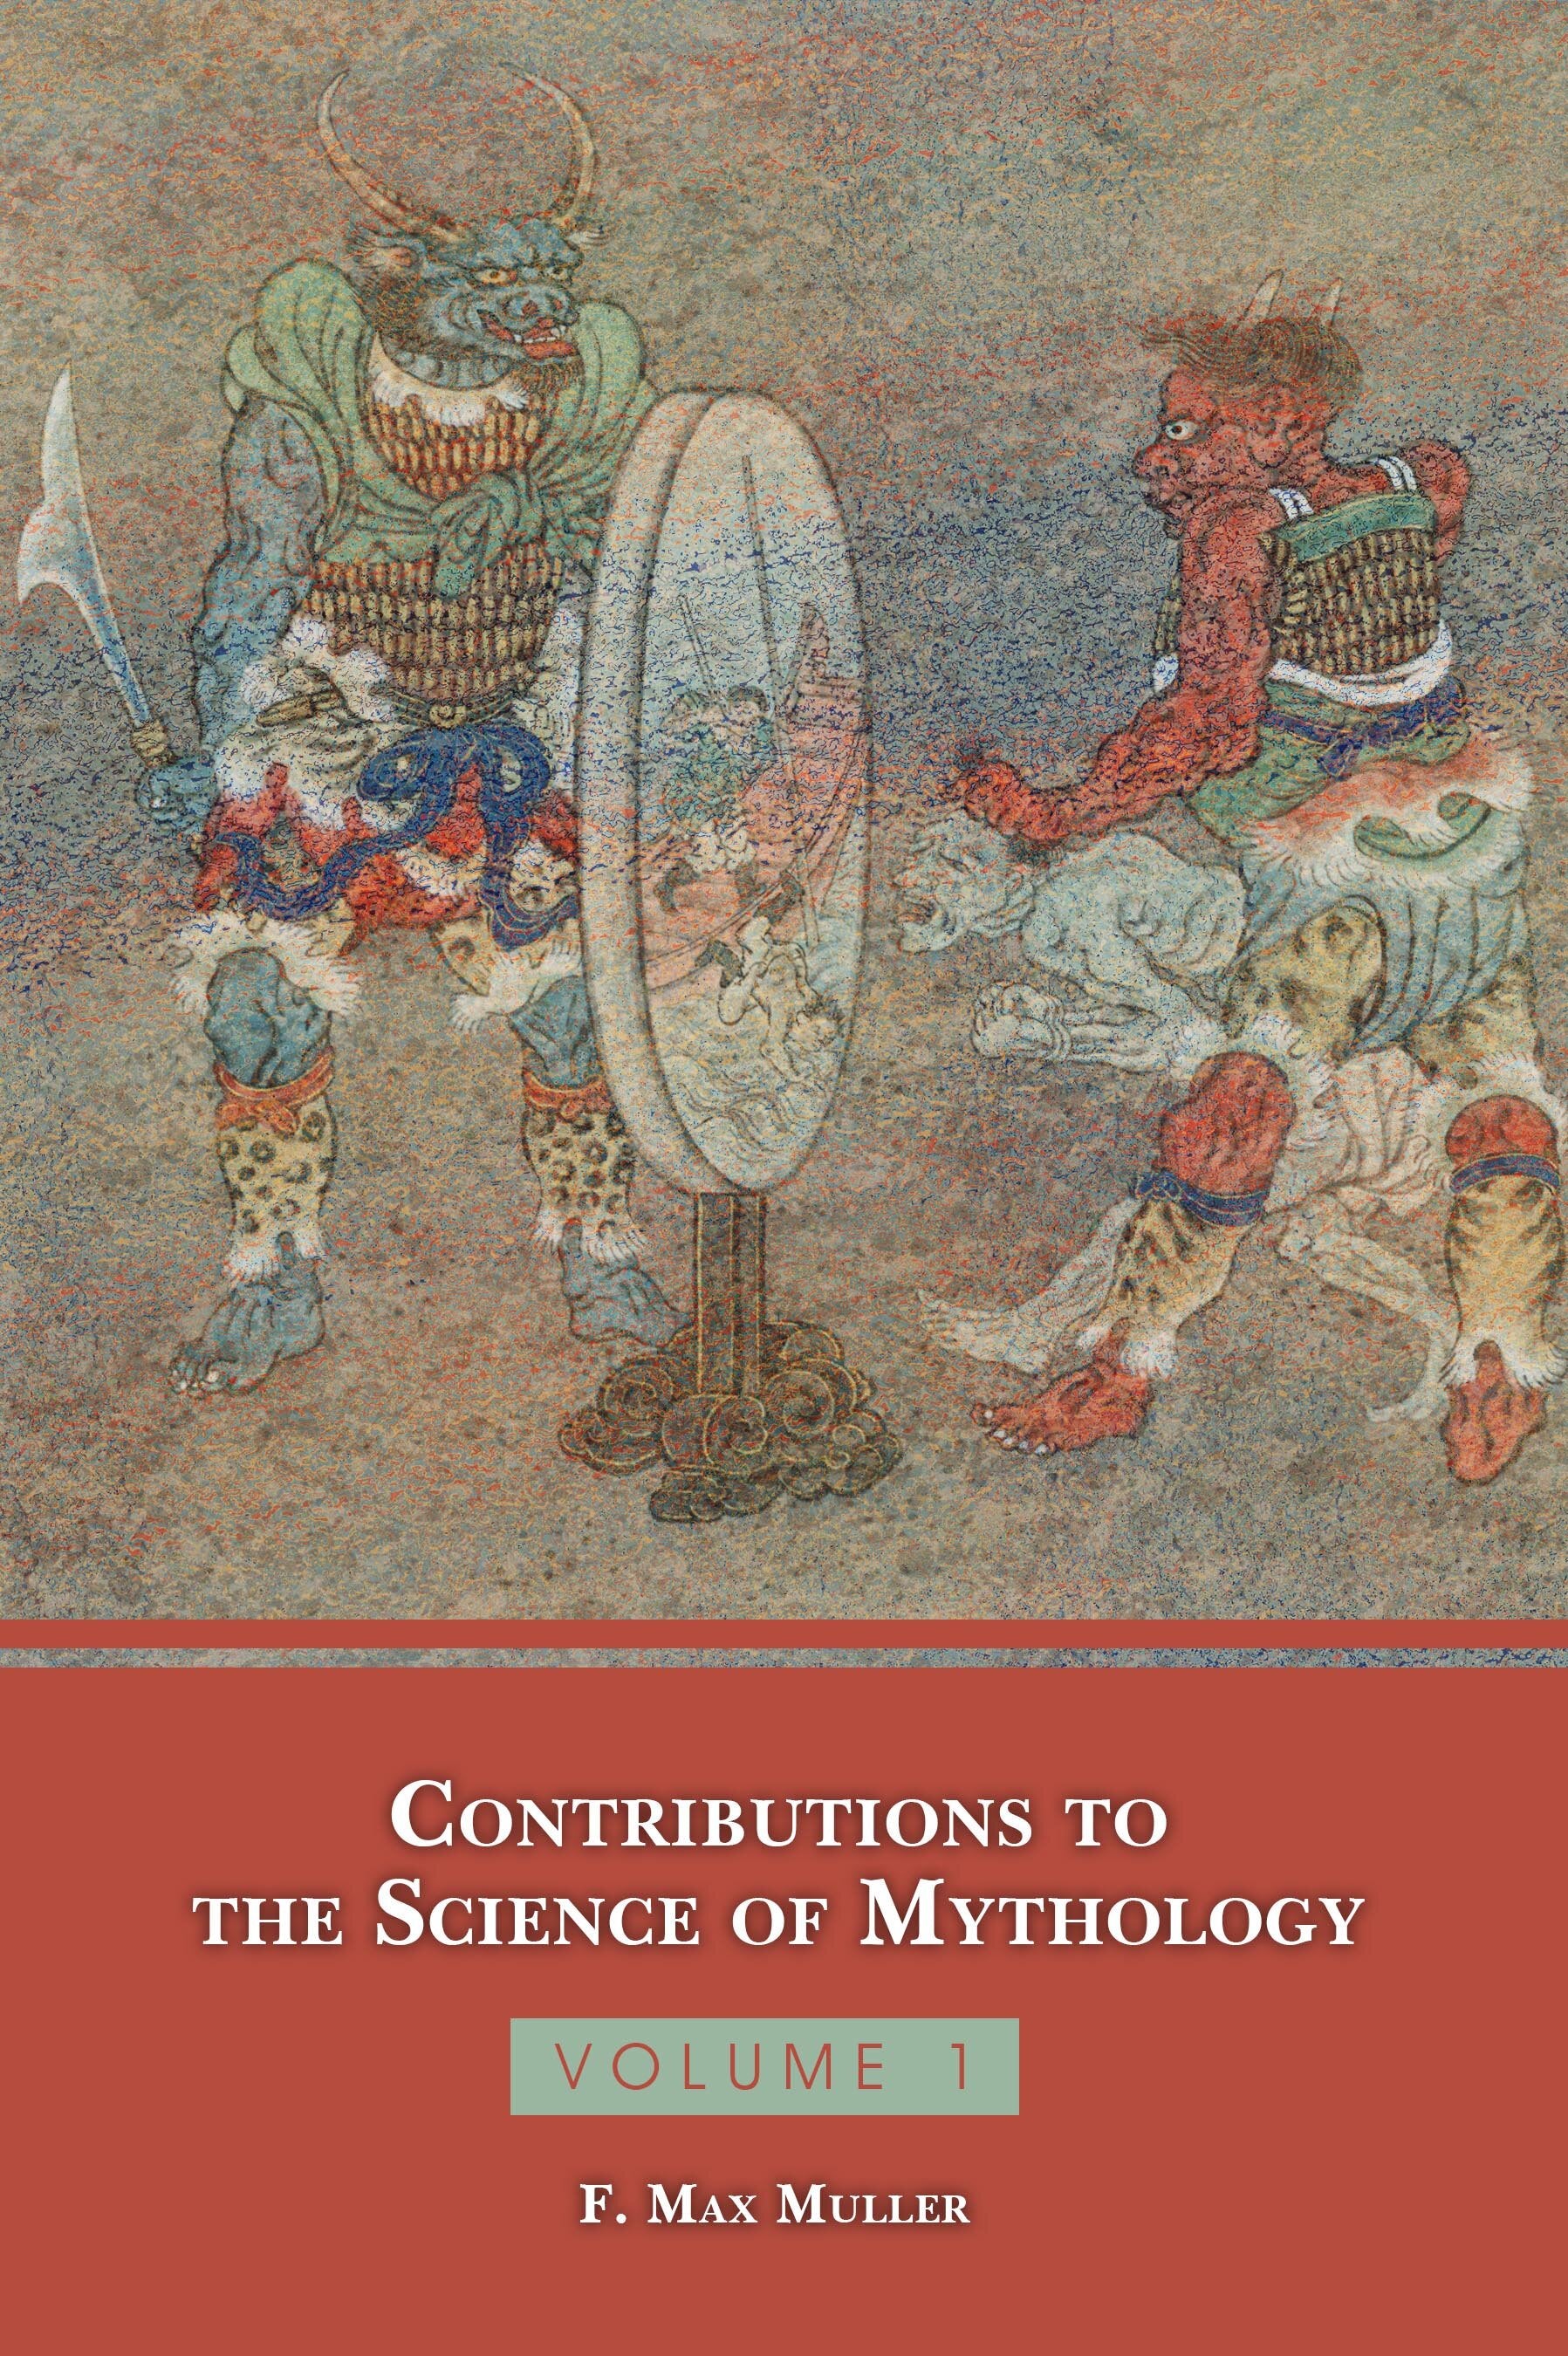 Contributions to the Science of Mythology Volume 1